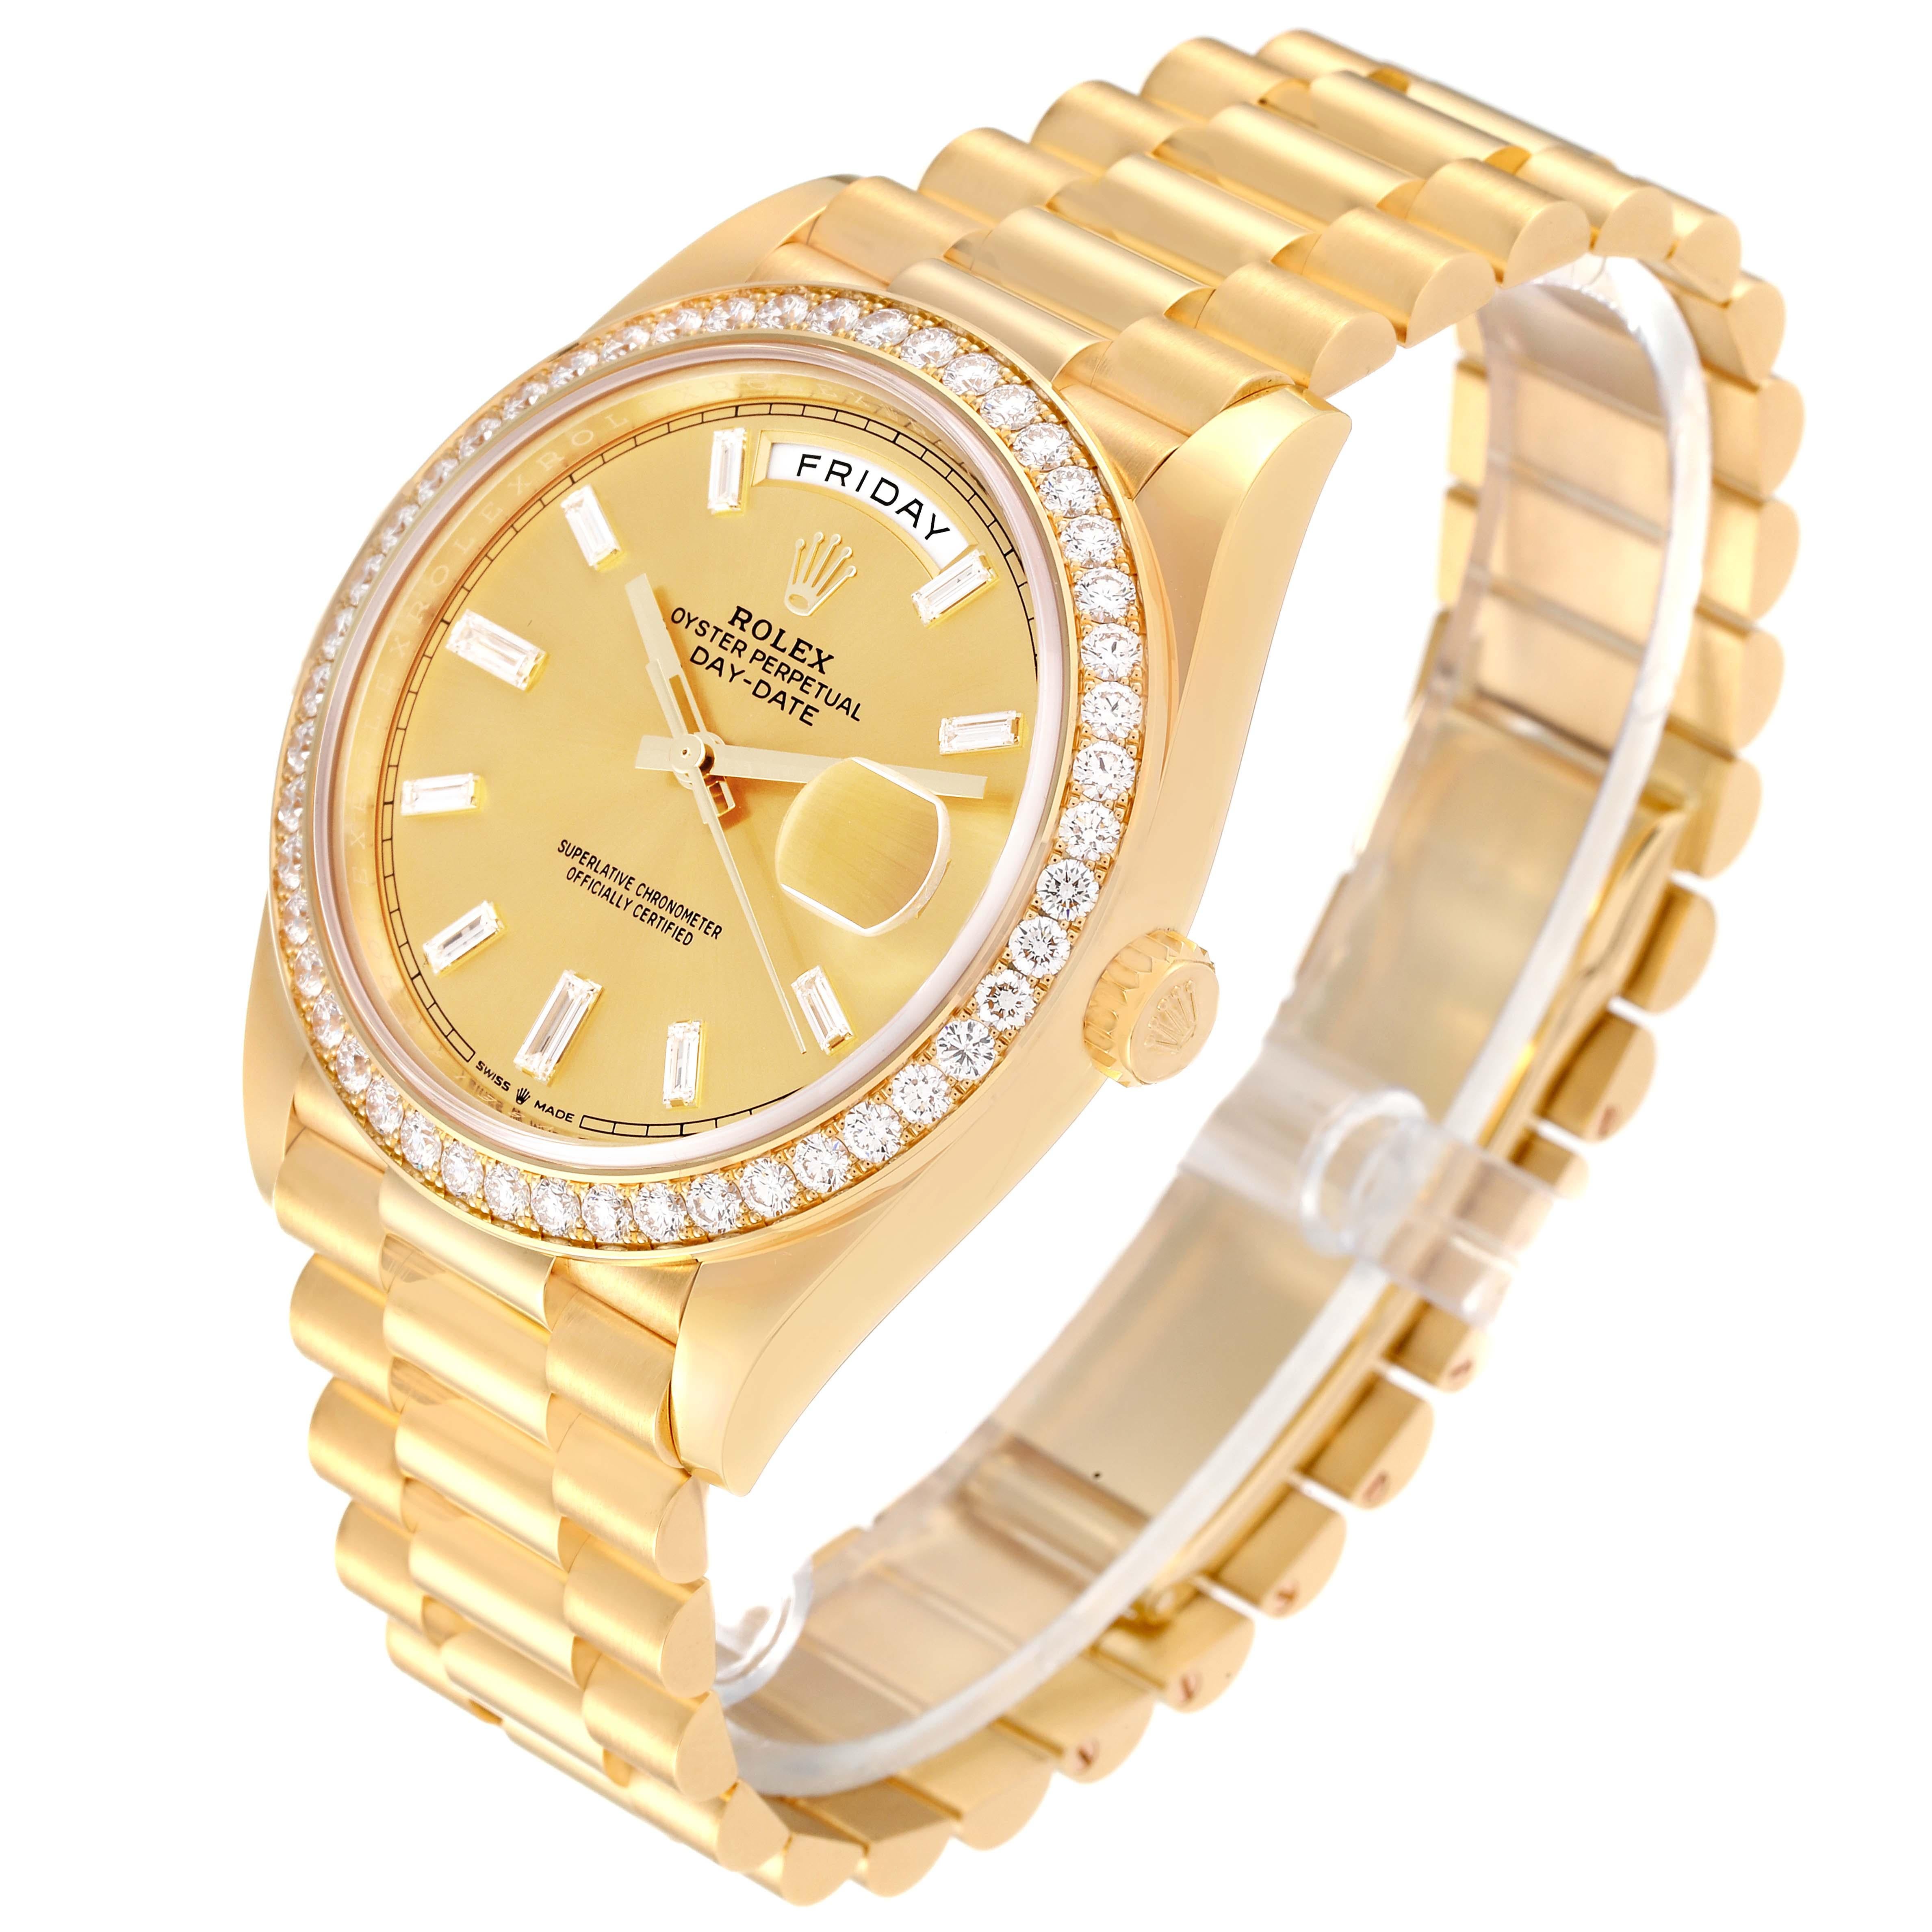 Rolex Day-Date 40 President Yellow Gold Diamond Bezel Mens Watch 228348 Box Card In Excellent Condition For Sale In Atlanta, GA